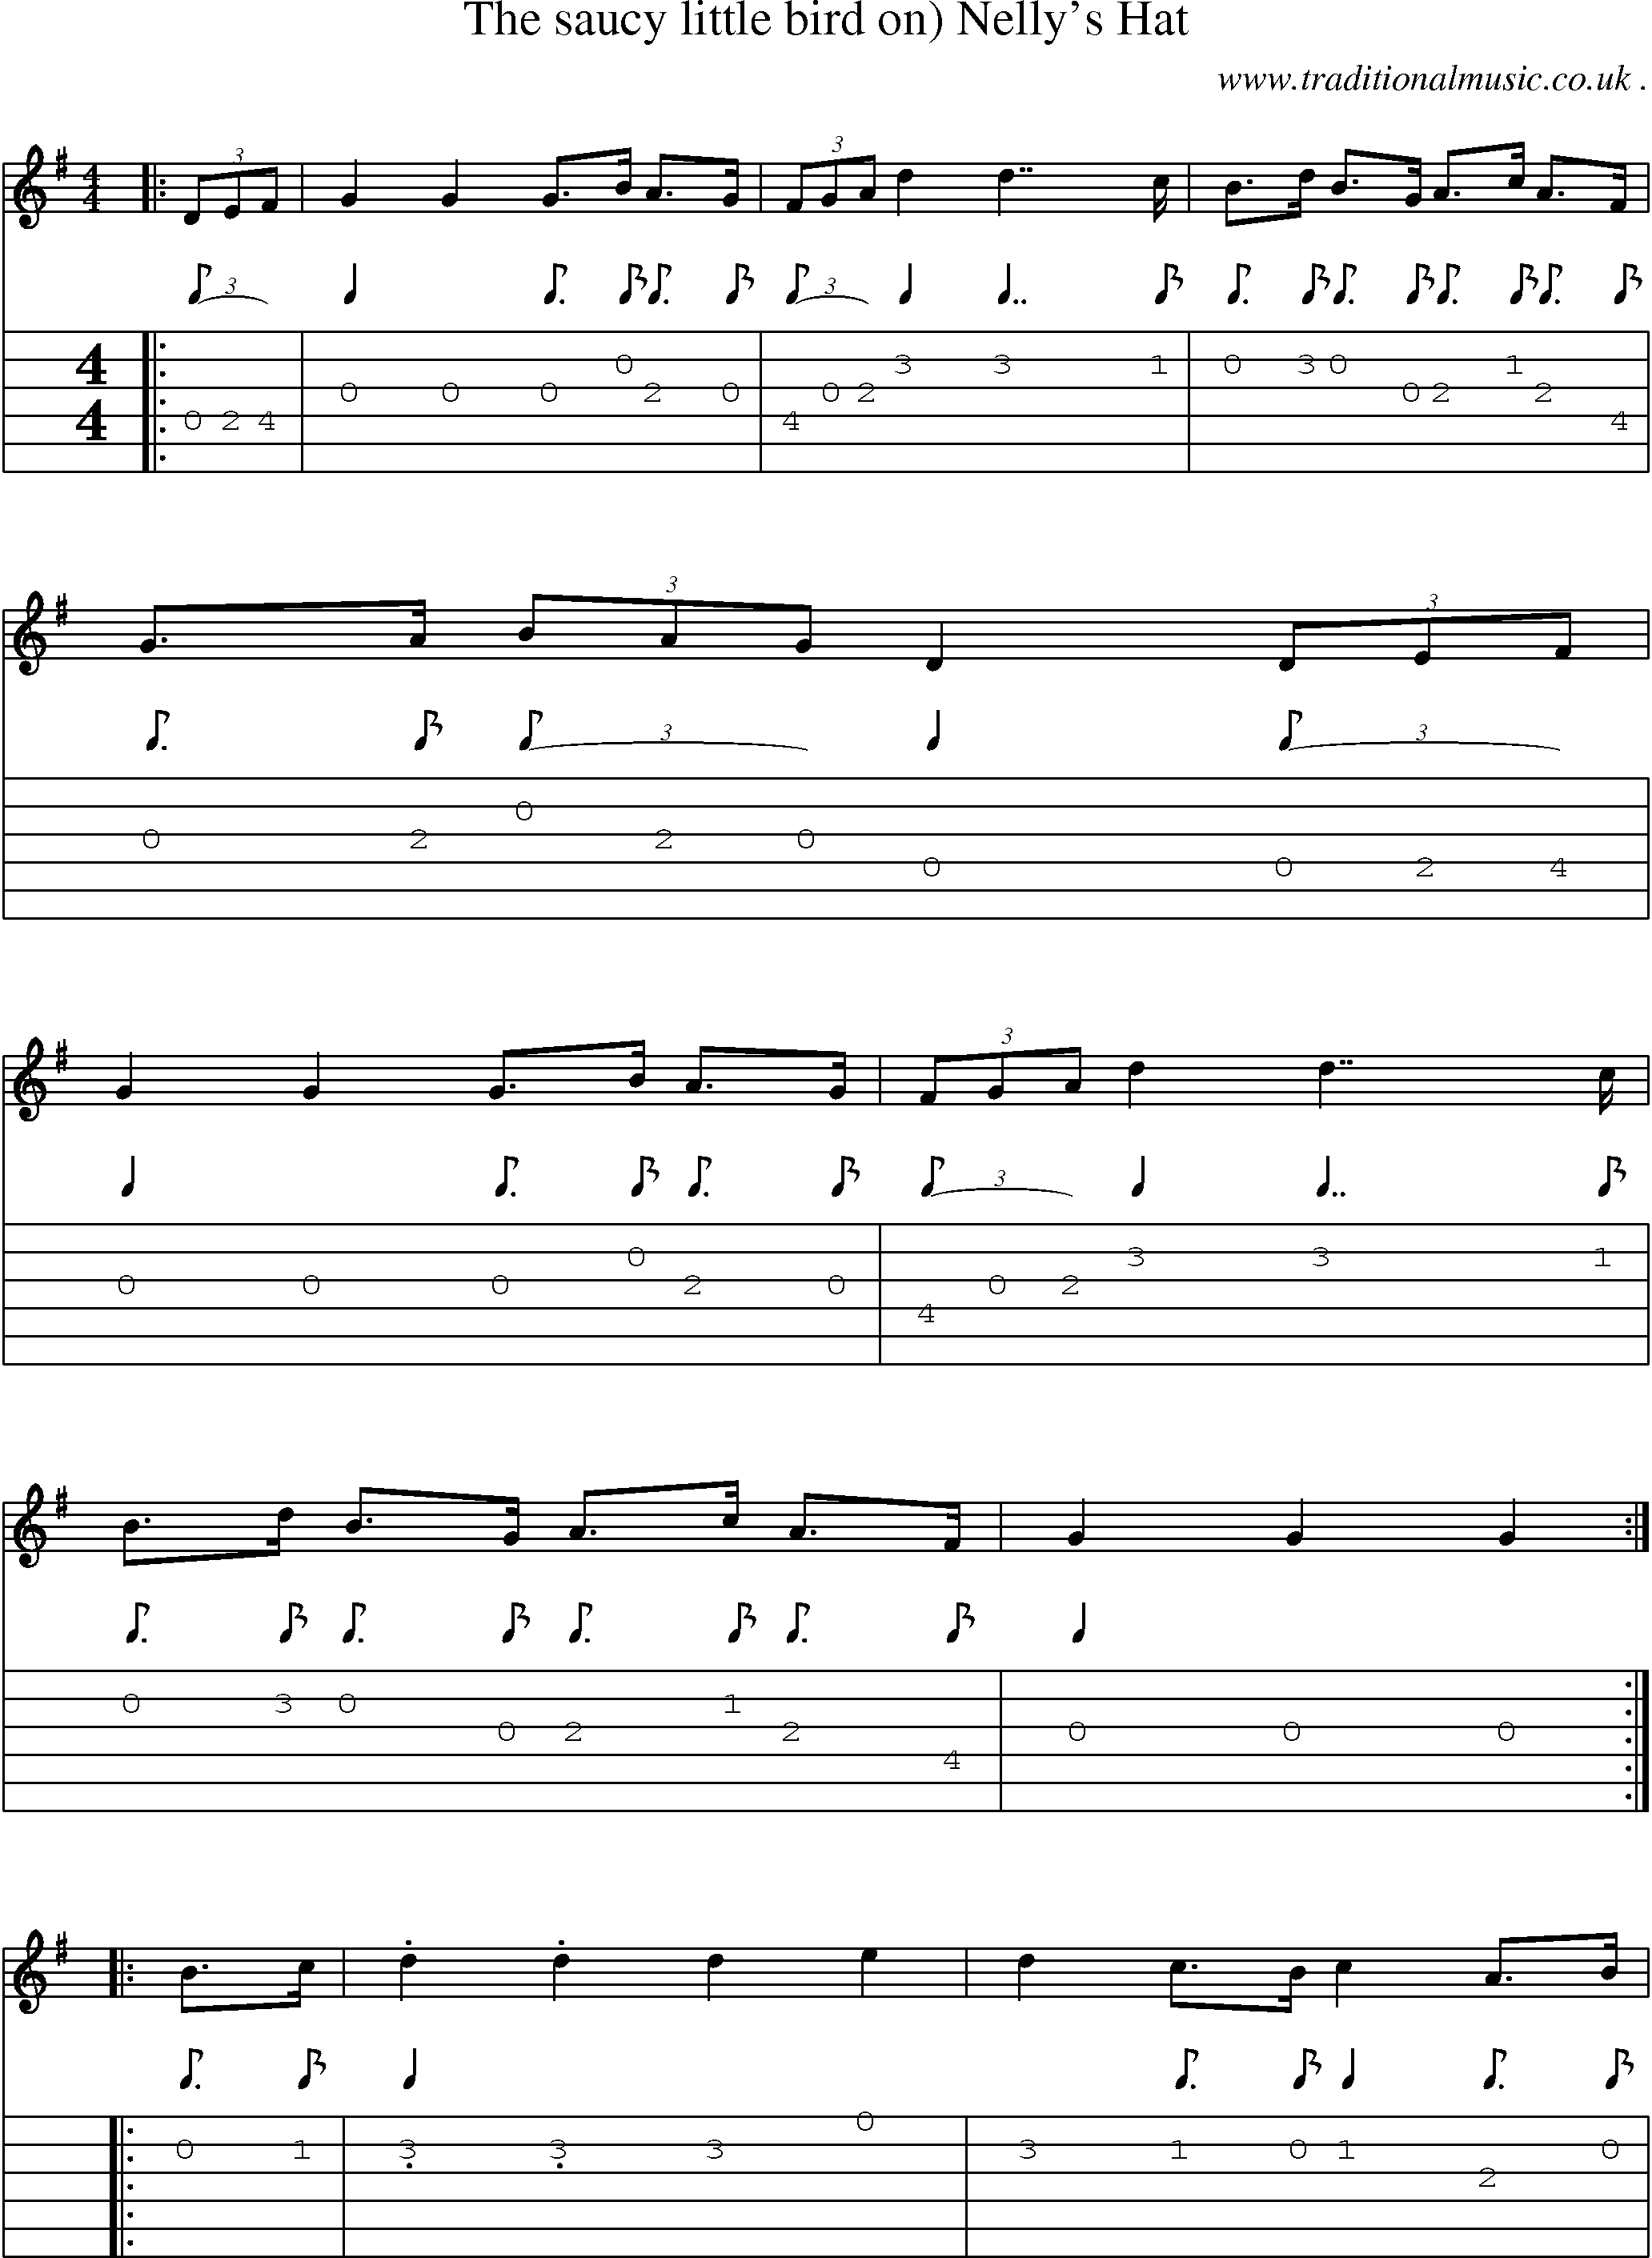 Sheet-Music and Guitar Tabs for The Saucy Little Bird On) Nellys Hat